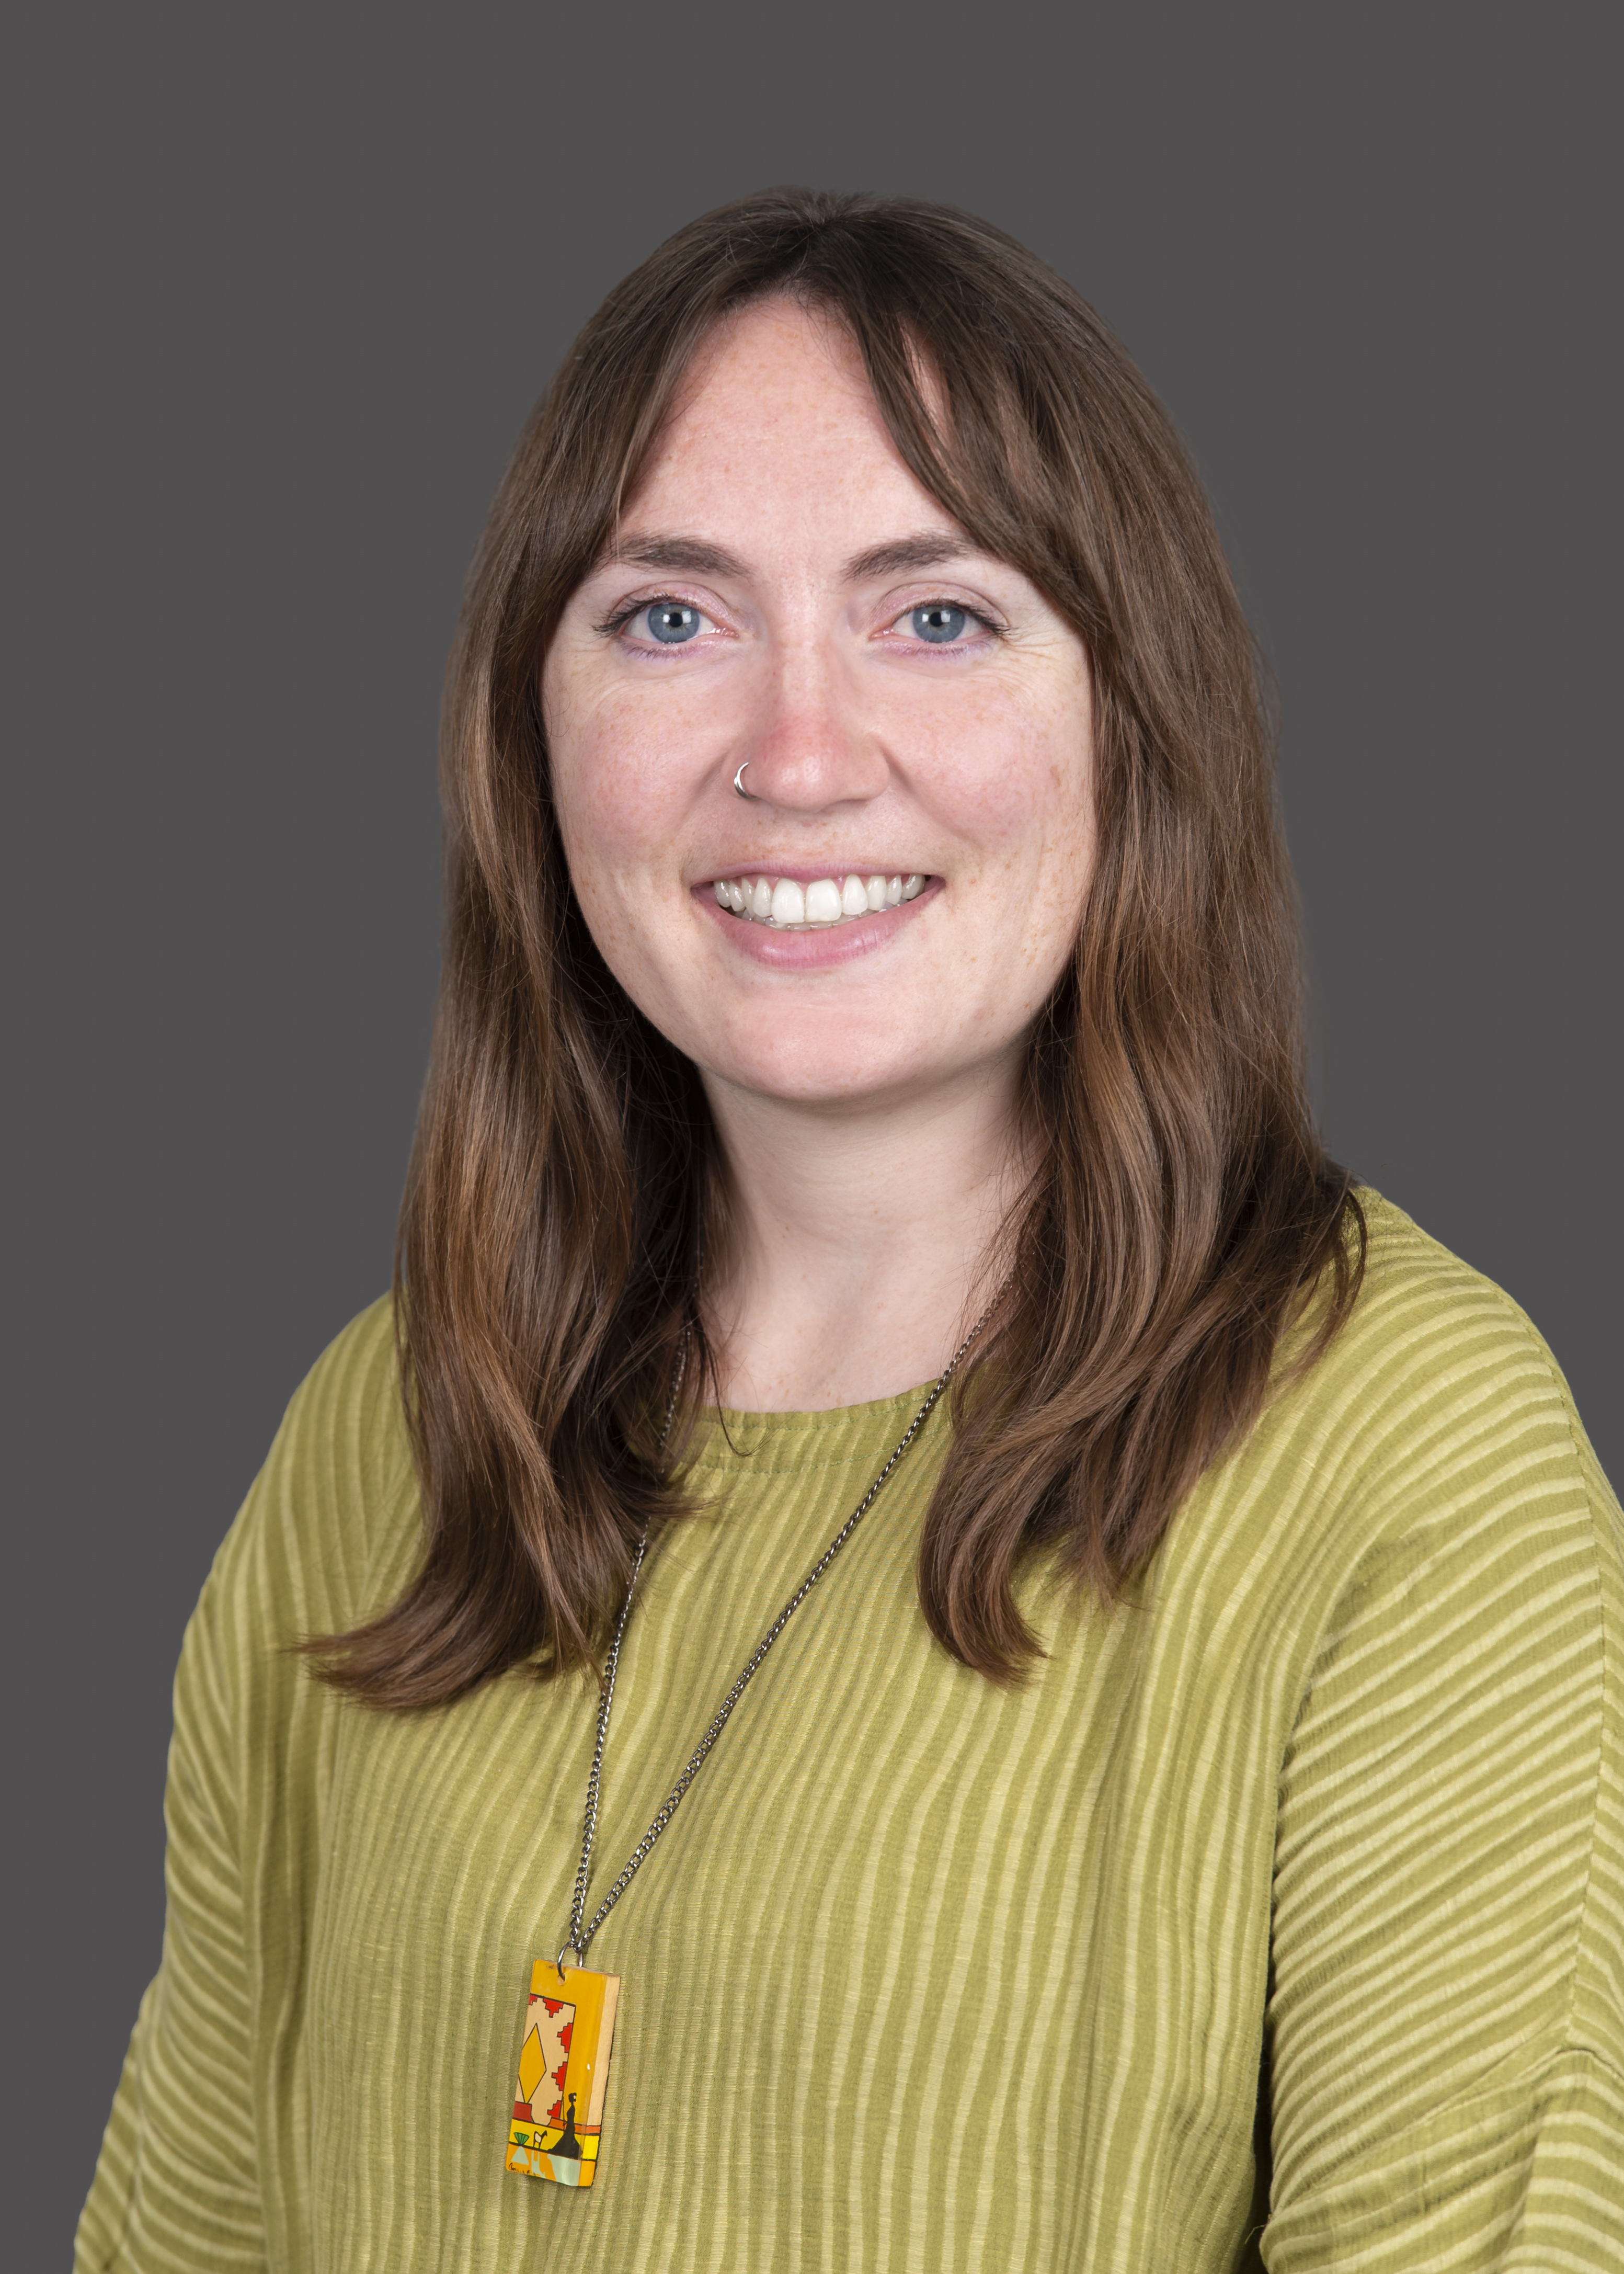 Headshot photo of Chelsey Wilhite, Ph.D.<span class="profile__pronouns"> (she/her)</span>